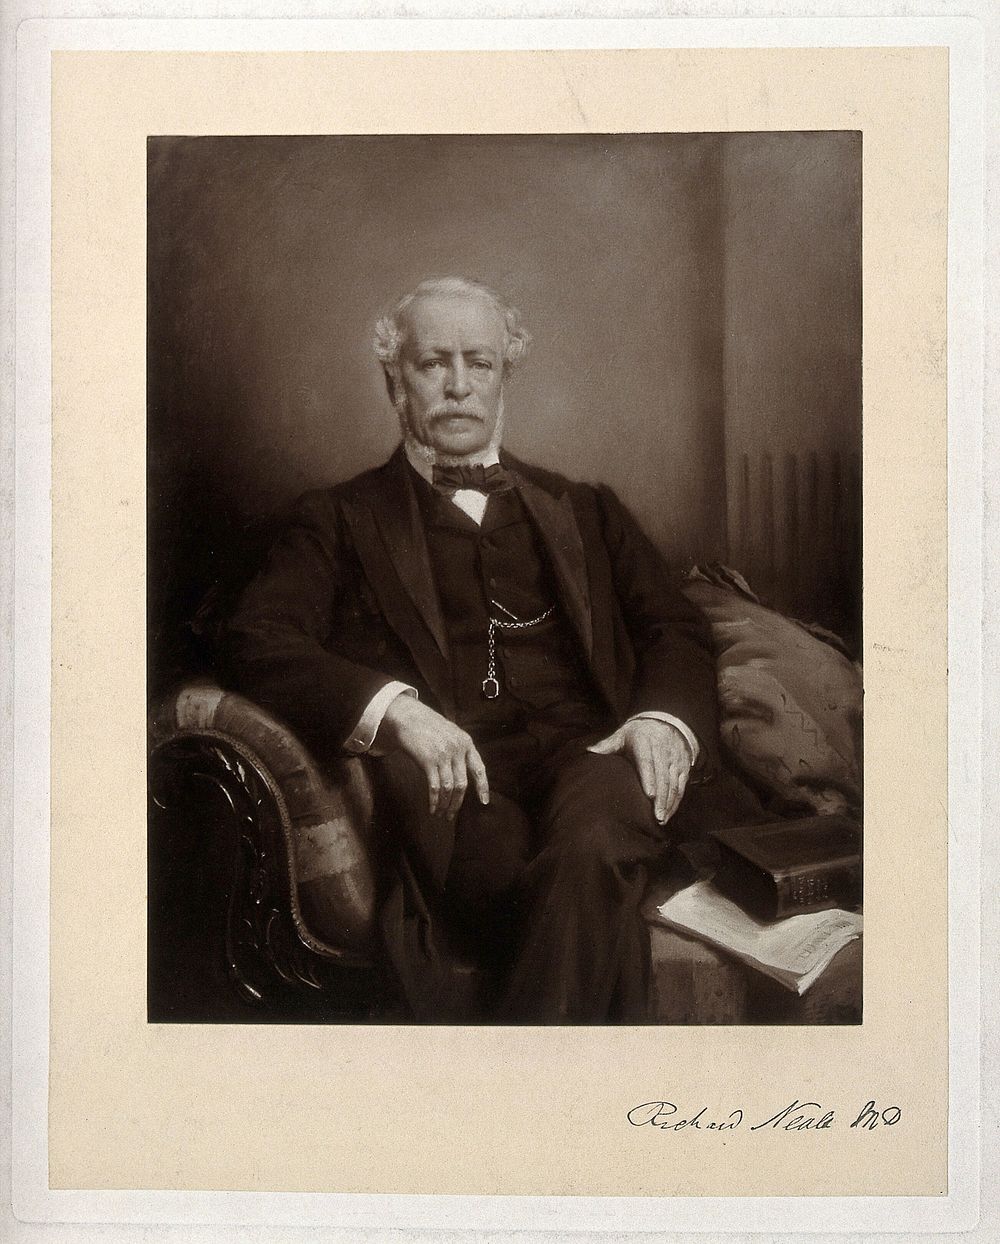 Richard Neale. Photograph by J.C. Hughes after a painting by T.B. Kennington.